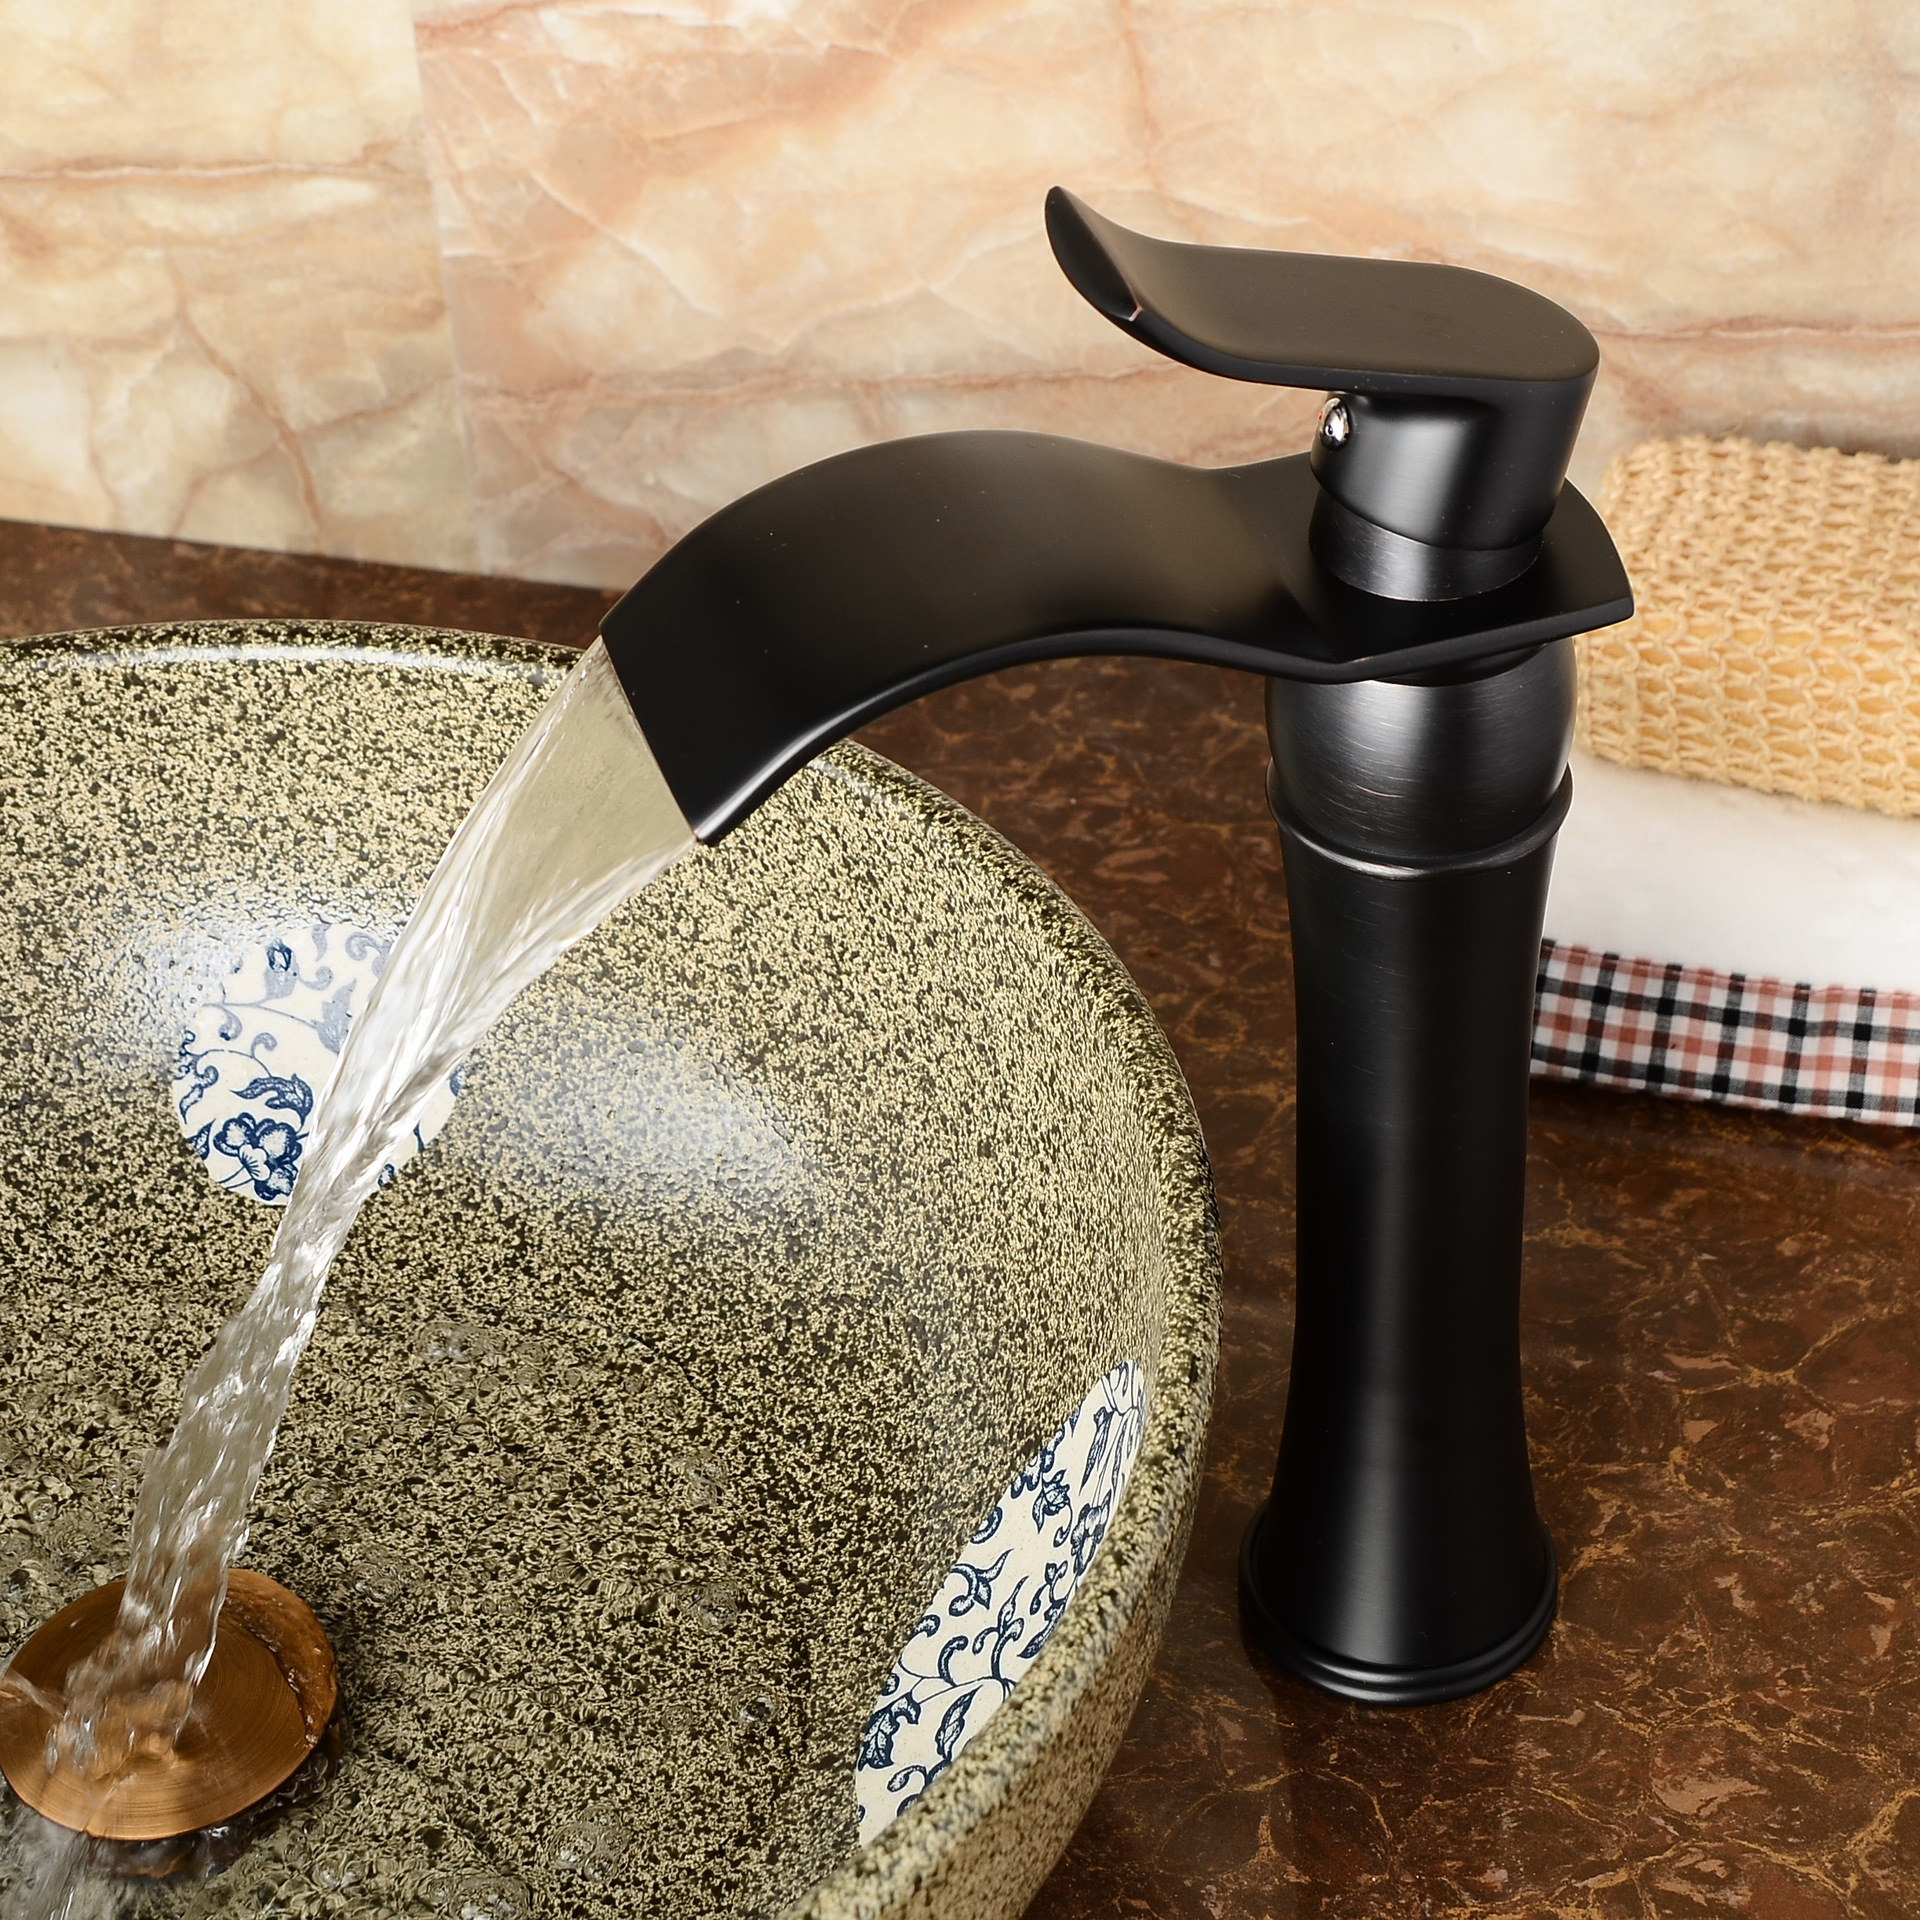 Junhai Xu Antique Black Oil Rubbed Waterfall Basin Faucet Hot and Cold